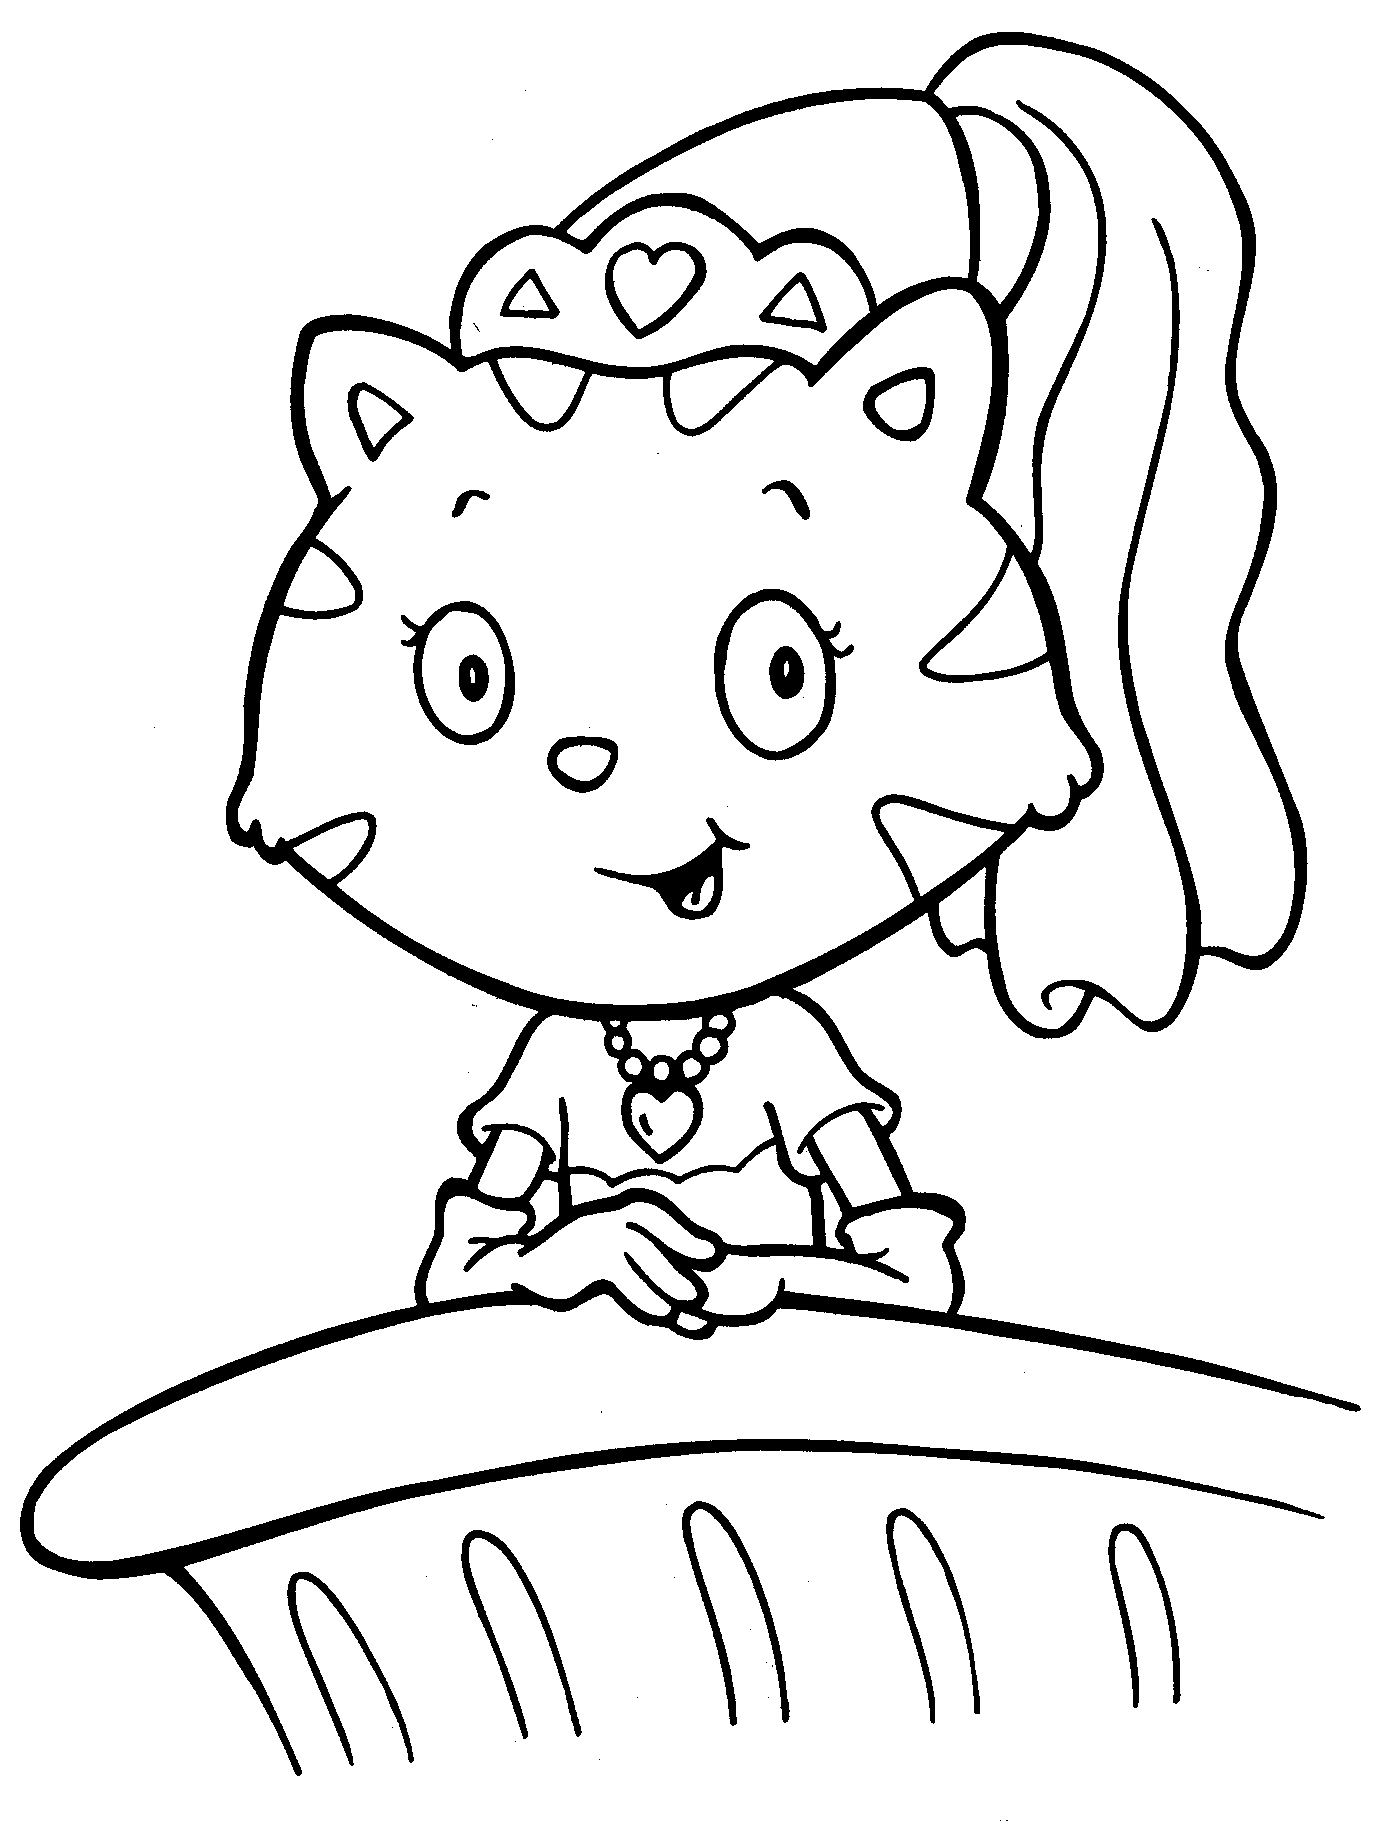 Cat Coloring Pages | Cats Coloring pages |Kitten Coloring pages | Cool cats | #23